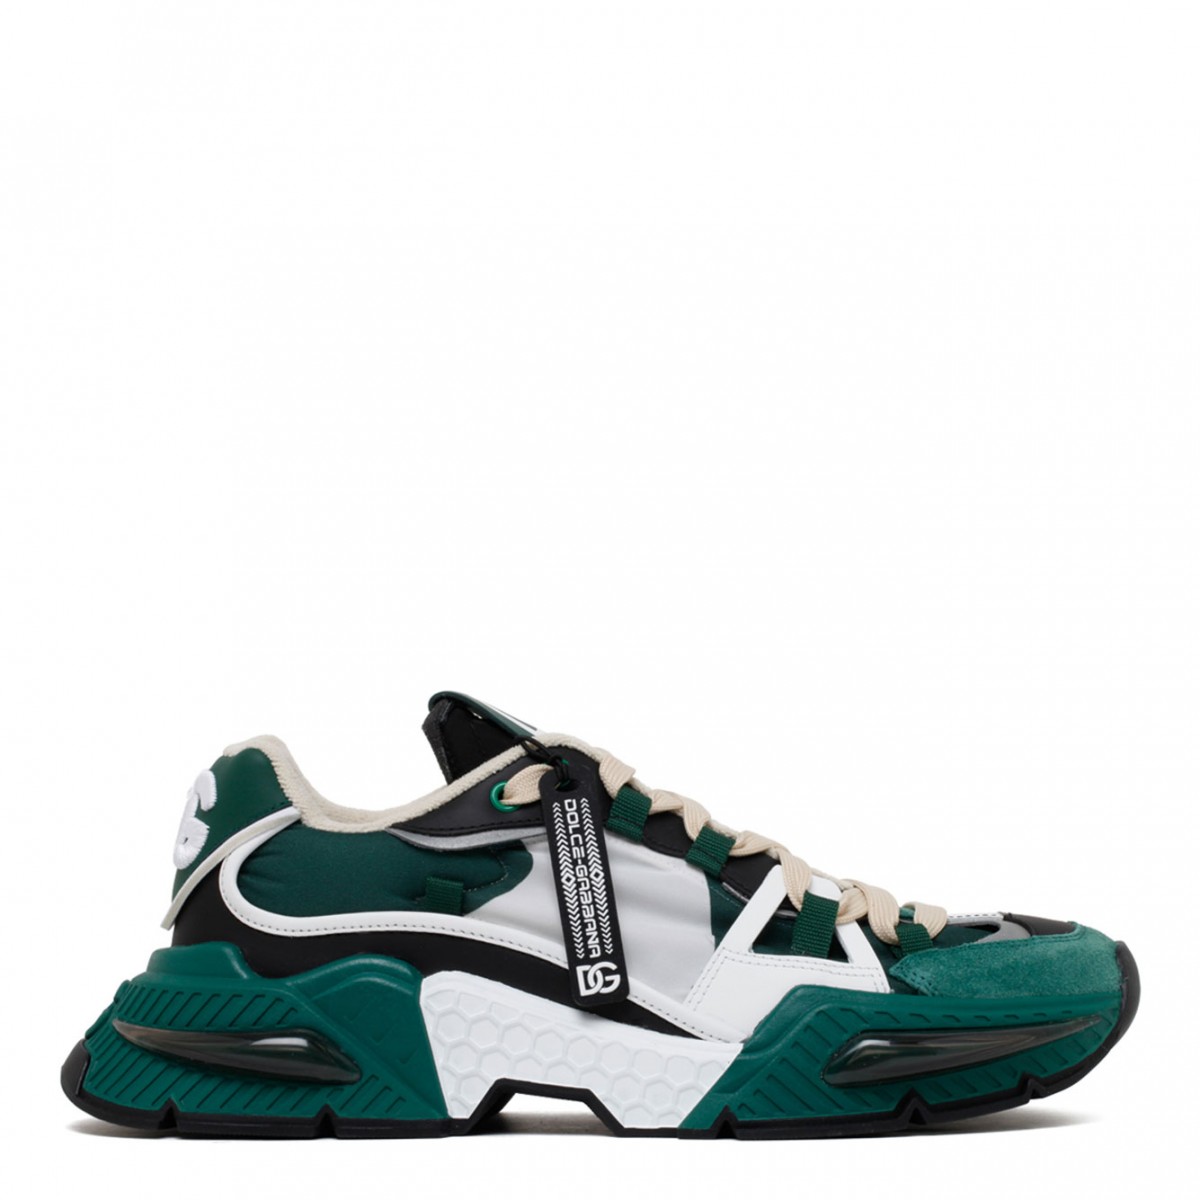 Green and Black Airmaster Sneakers